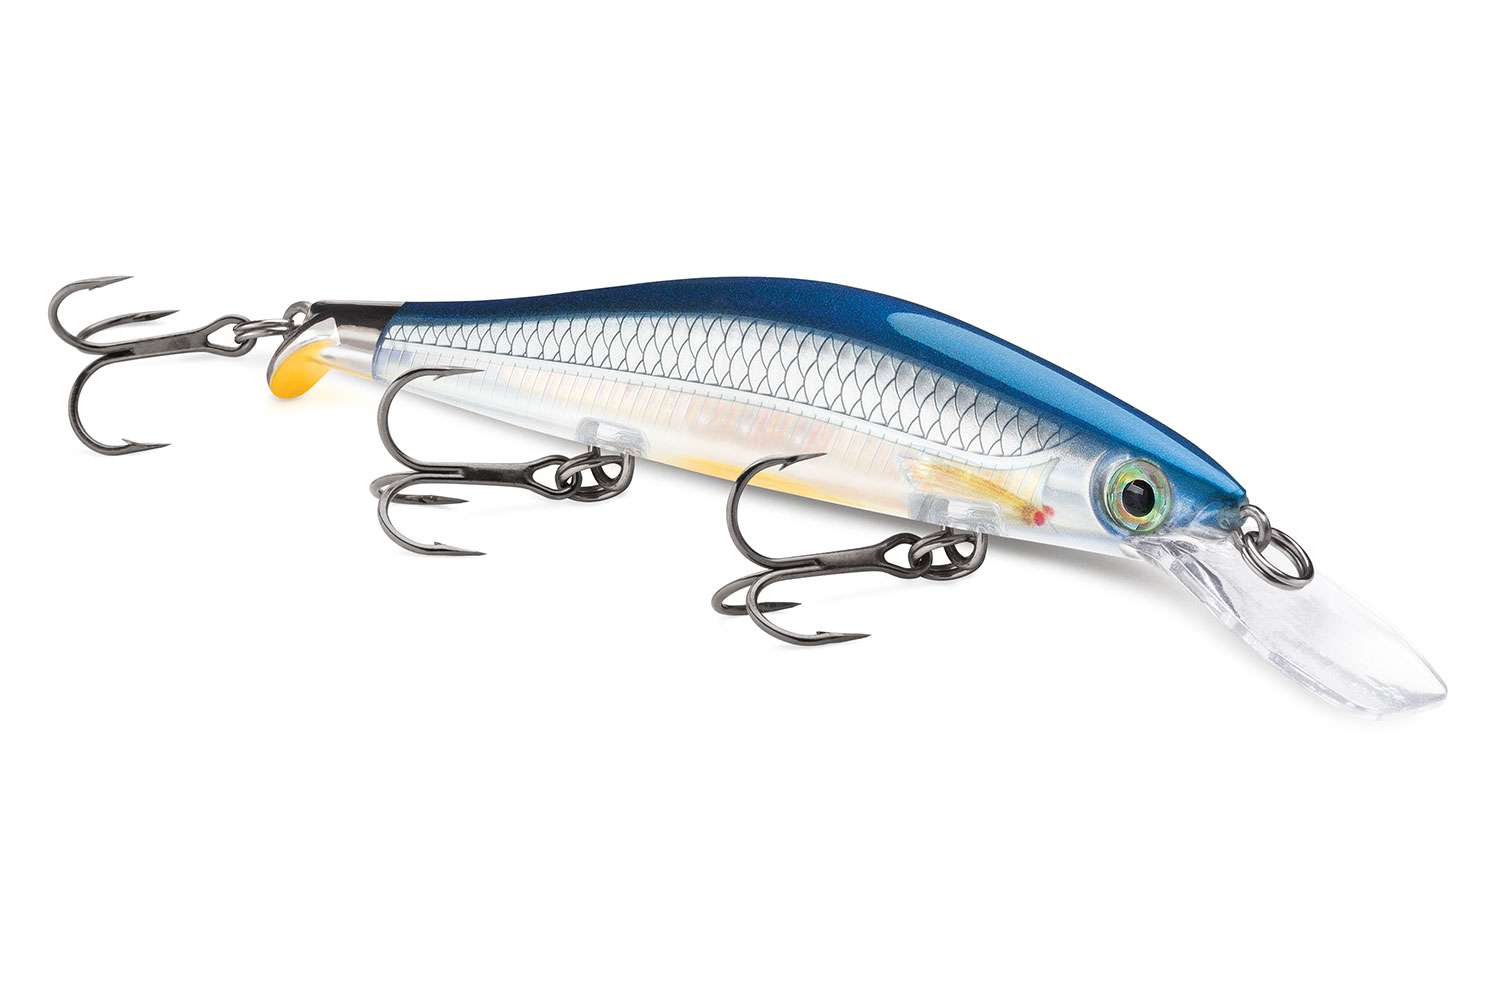  <B>Rapala Ripstop 12 Deep</B> <BR>
Now available in a deep-diving model, the RipStop tail design creates a fast ripping, hard stopping, flashing swimbait action. Its forward motion stops on a dime, with a subtle shimmy before coming to rest, then ever so slightly lifts its head with a super slow rise. Cast and wind, wind and stop, twitch, snap, rip and suspend, fish it your favorite way for all species of gamefish. Four- to 8-foot diving depth, 4 3/4 inches, weighs 9/16 ounces, features No. 5 VMC trebles and available in 14 colors. <BR>

<B>MSRP: $11.99</B>